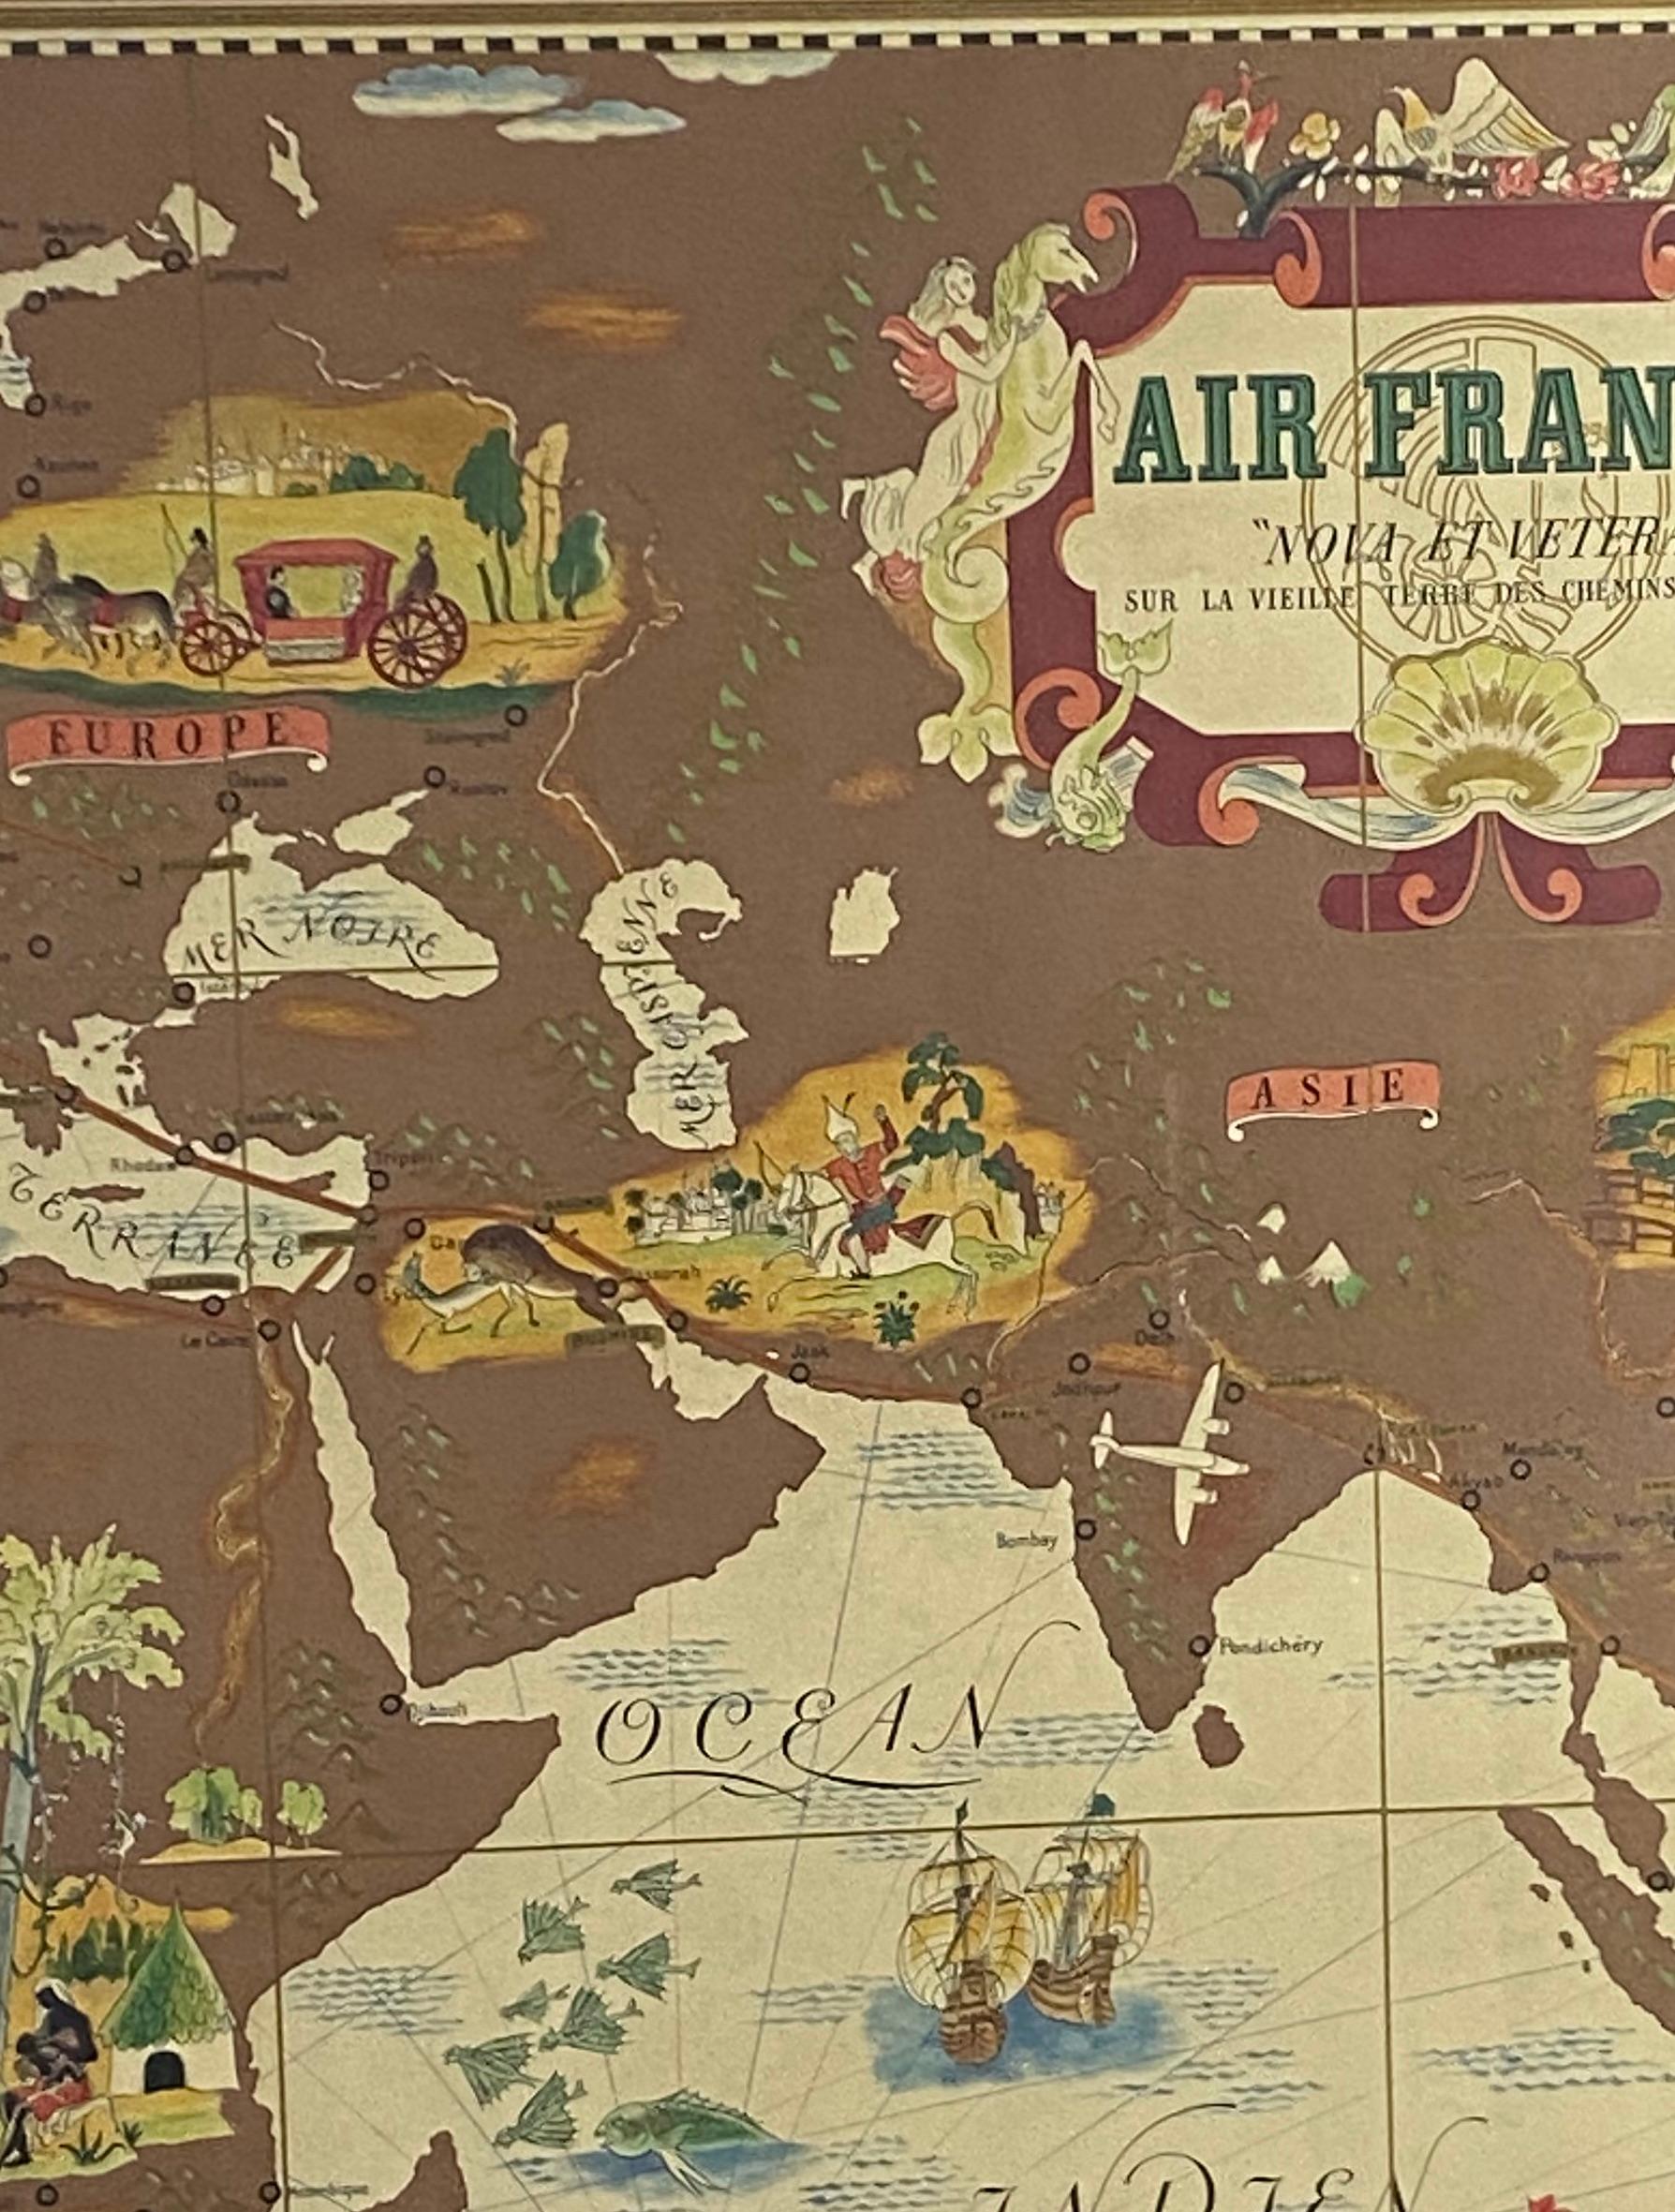 Air France 'Nova et Vetera' poster map designed by Lucien Boucher

Paris France 1939

Advertising poster designed by Lucien Boucher for the Air France company and published in Paris by Perceval in 1939 at the dawn of World War II. It is one of